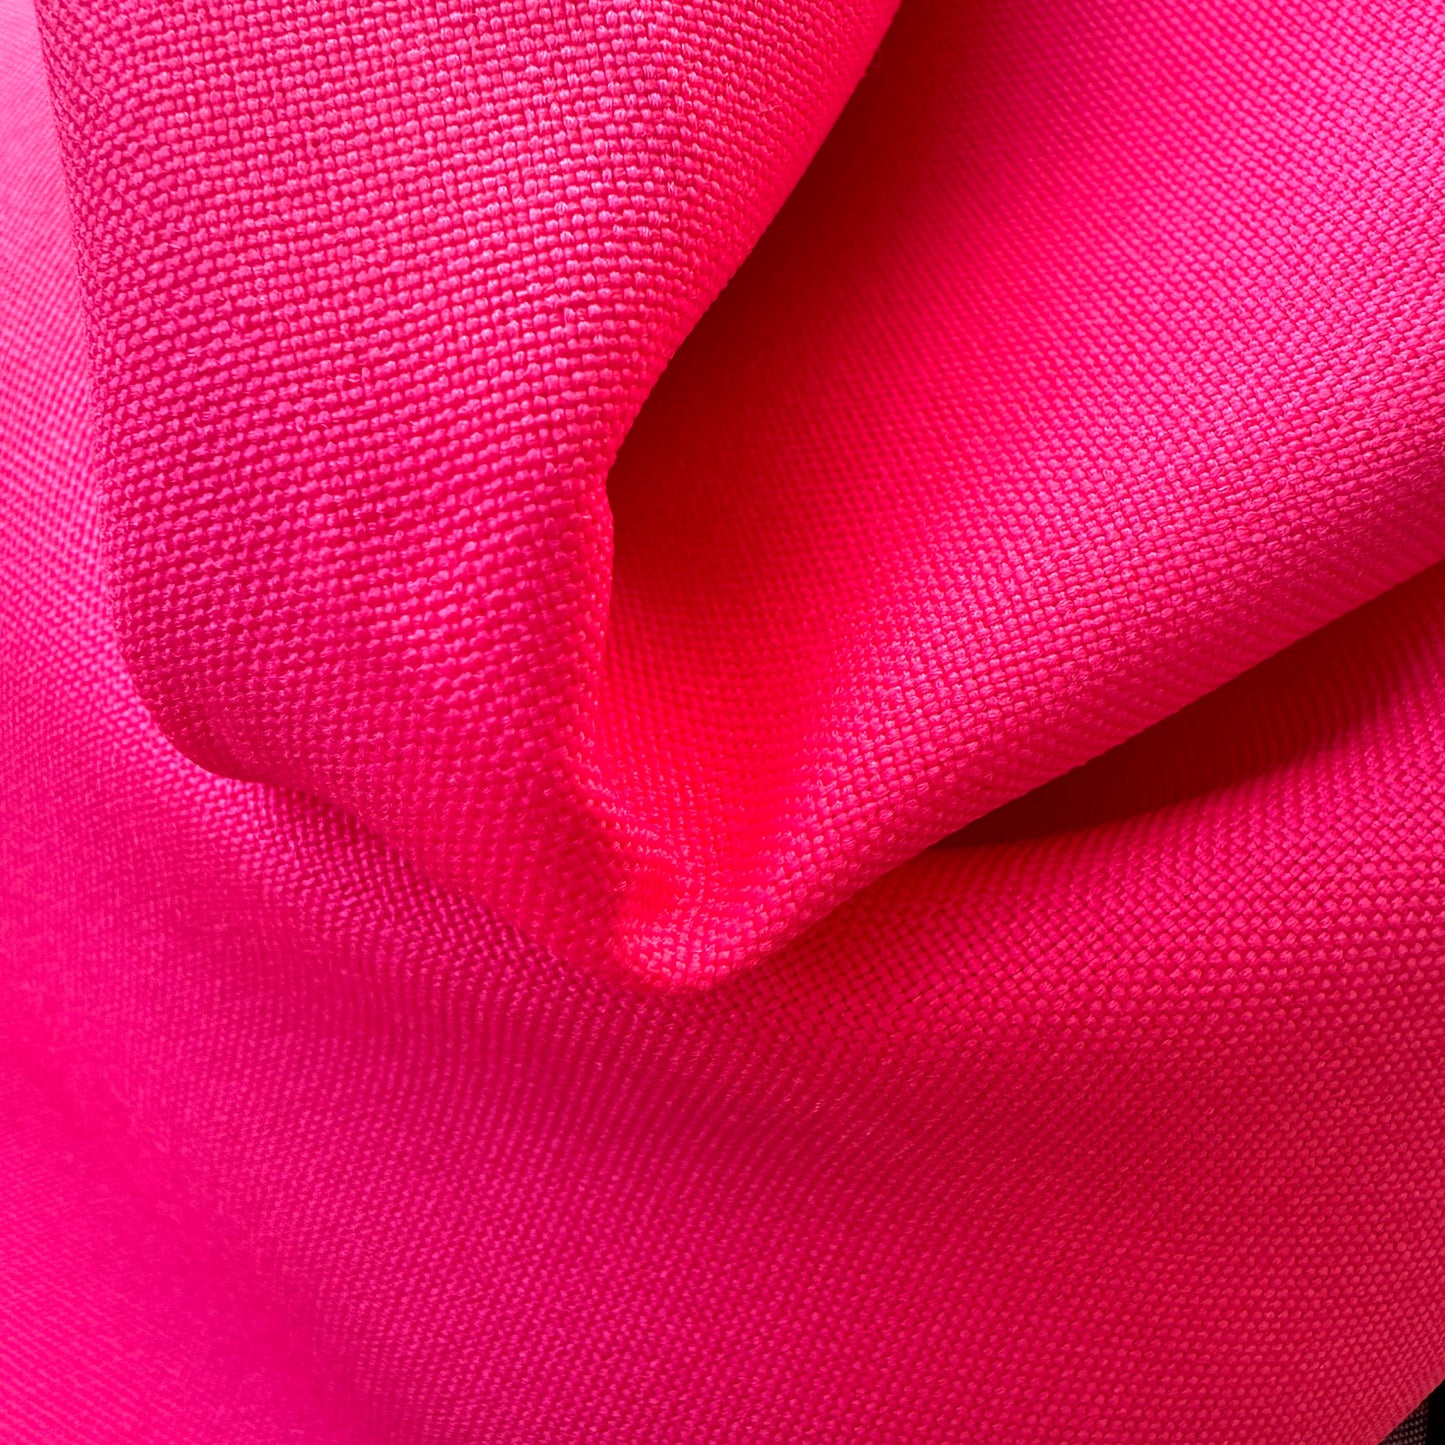 Bright Pink Fabric - Perfect for Bag Lining